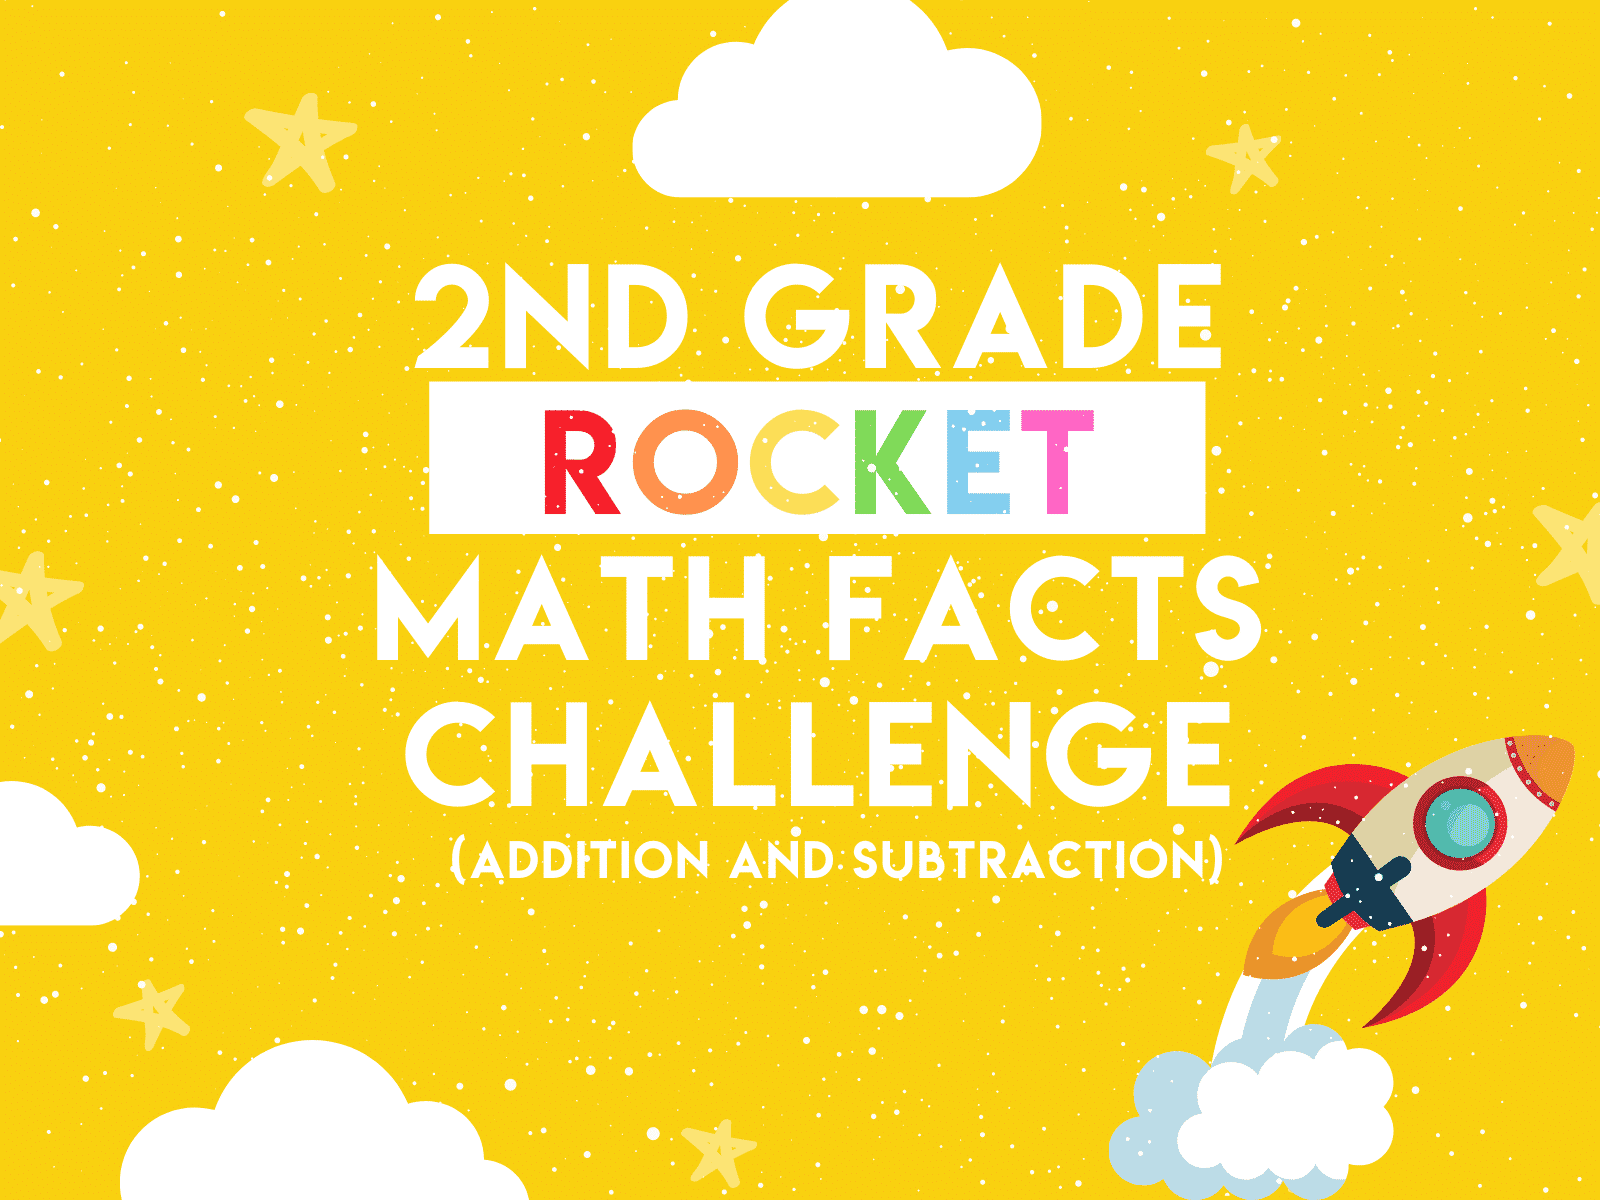 Practice second grade math facts in a fun and interactive way with this downloadable addition and subtraction challenge.